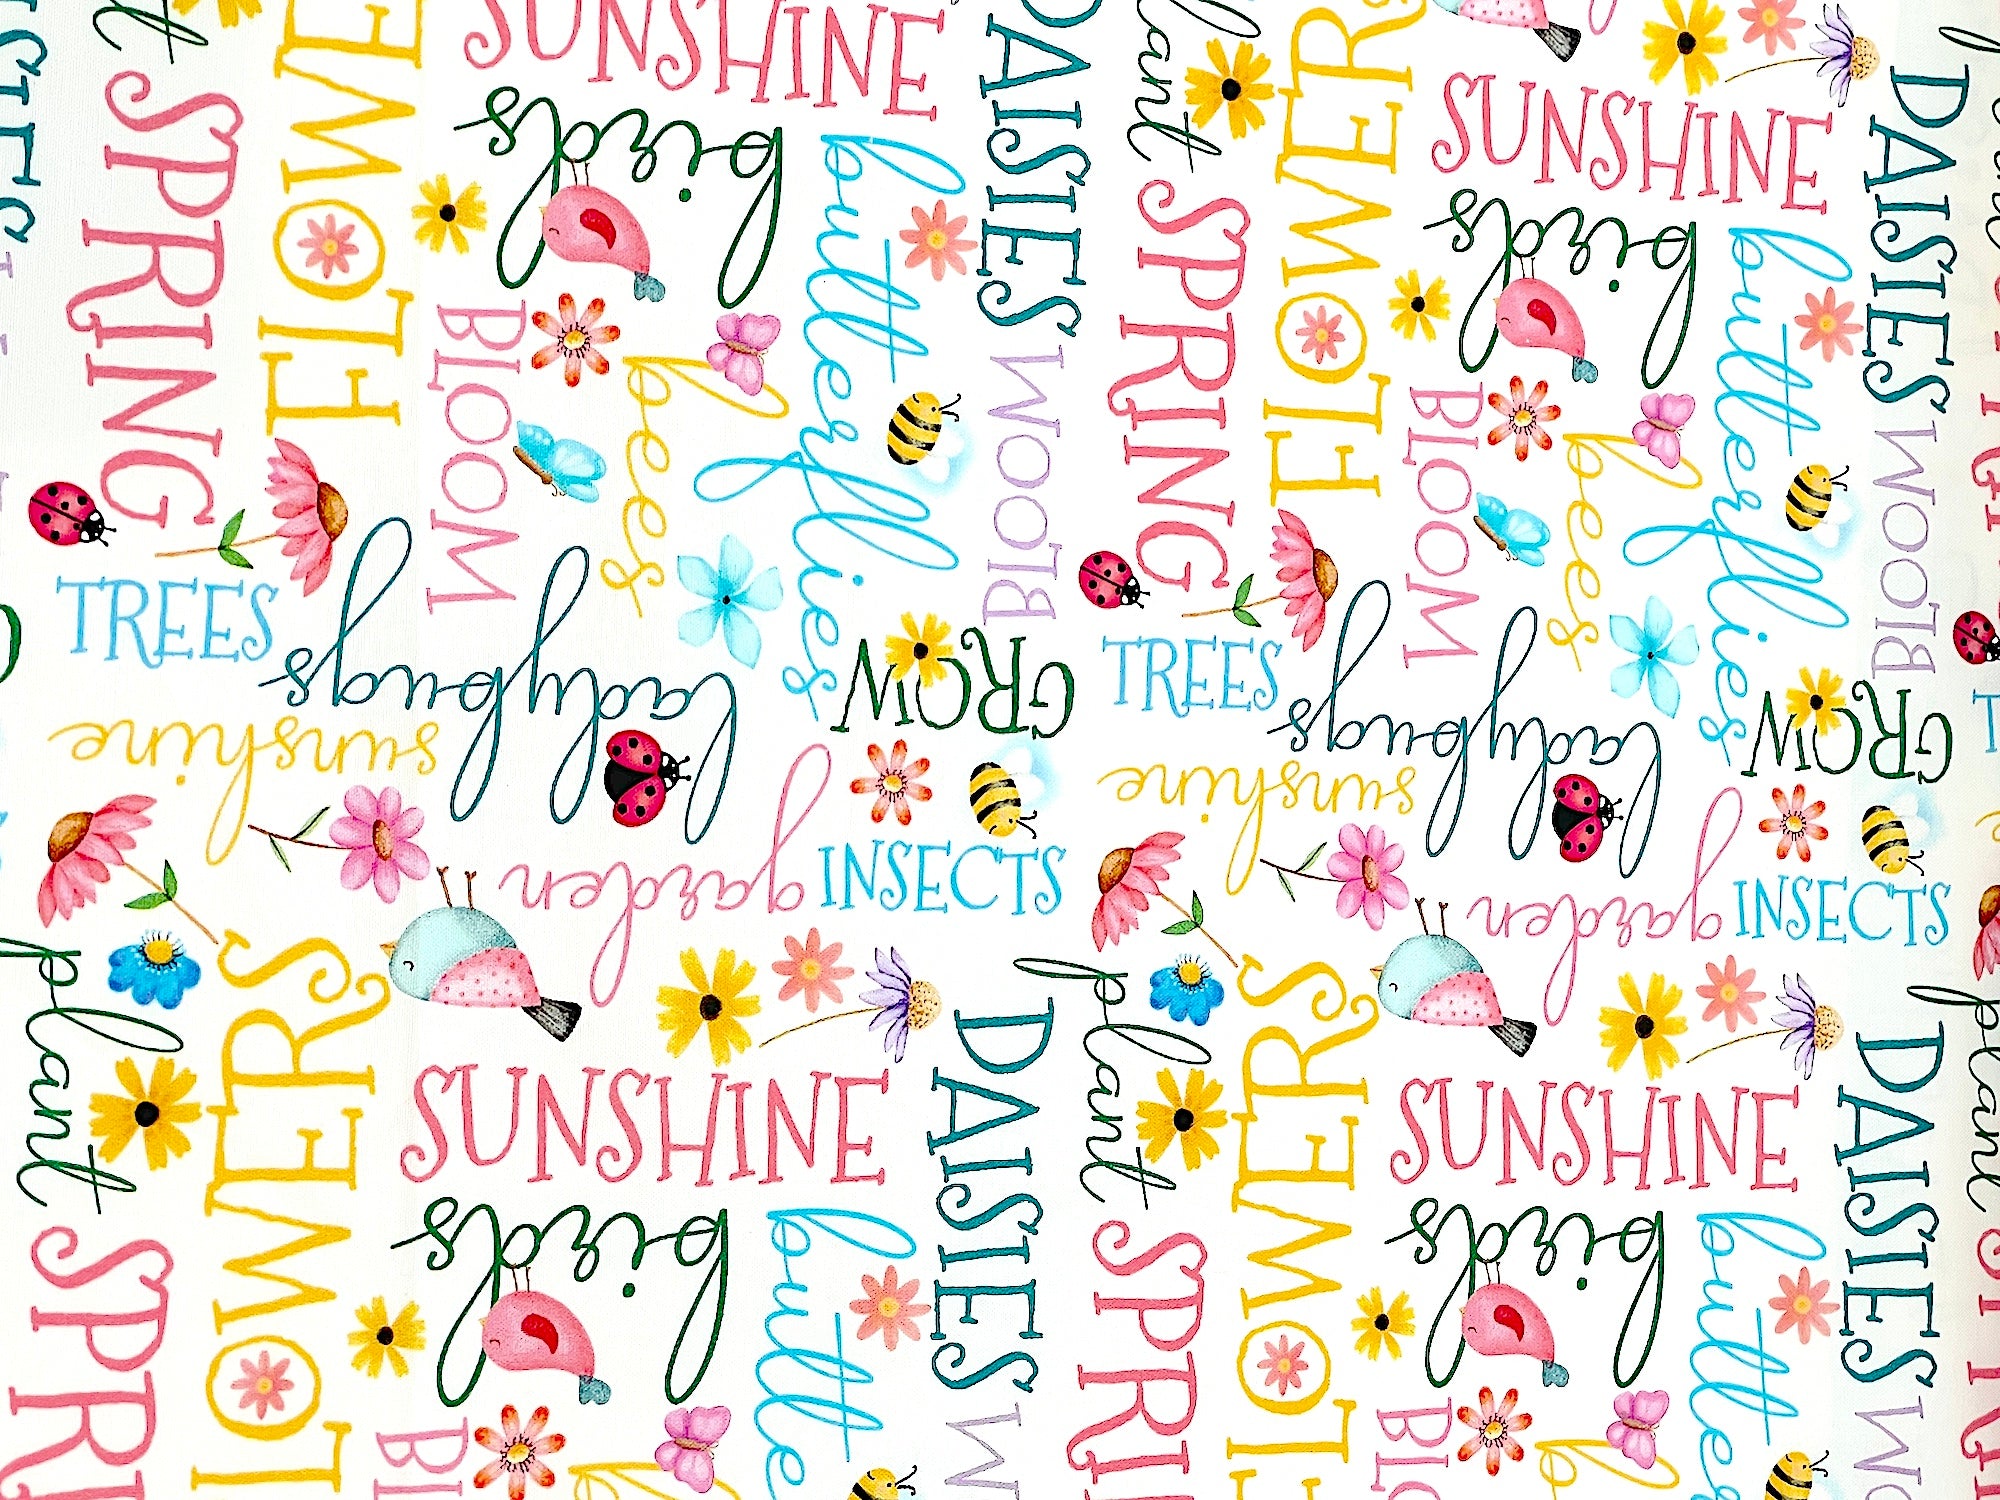 This fabric is part of the Sunshine Days collection by Nicole Decamp.&nbsp; This white cotton fabric is covered with sayings such as daisies, bloom, spring, butterflies, birds and more.&nbsp; Sprinkled throughout you will also find birds, bees and ladybugs.